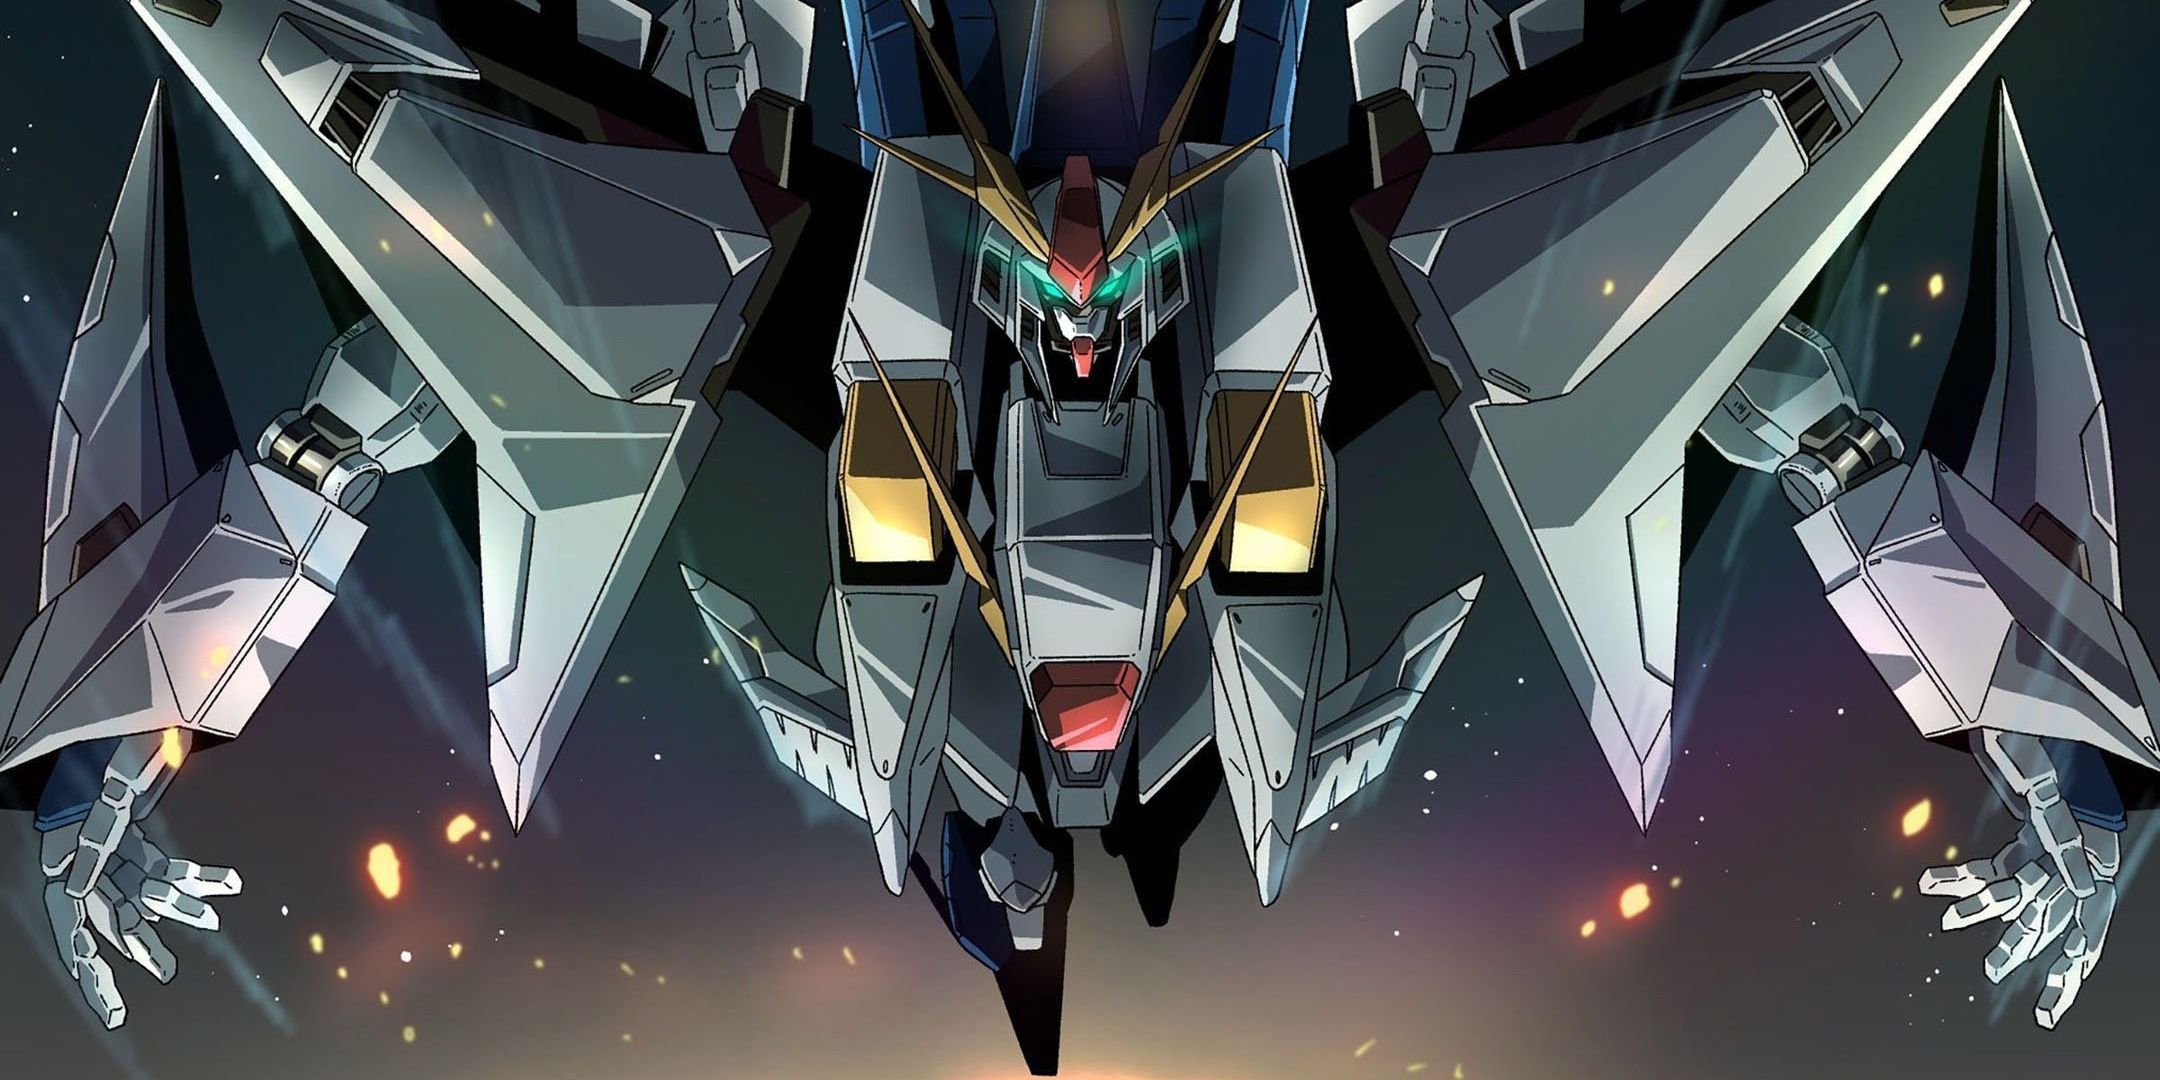 Mobile Suit Gundam: Hathaway poster with Noa's RX-105 Gundam